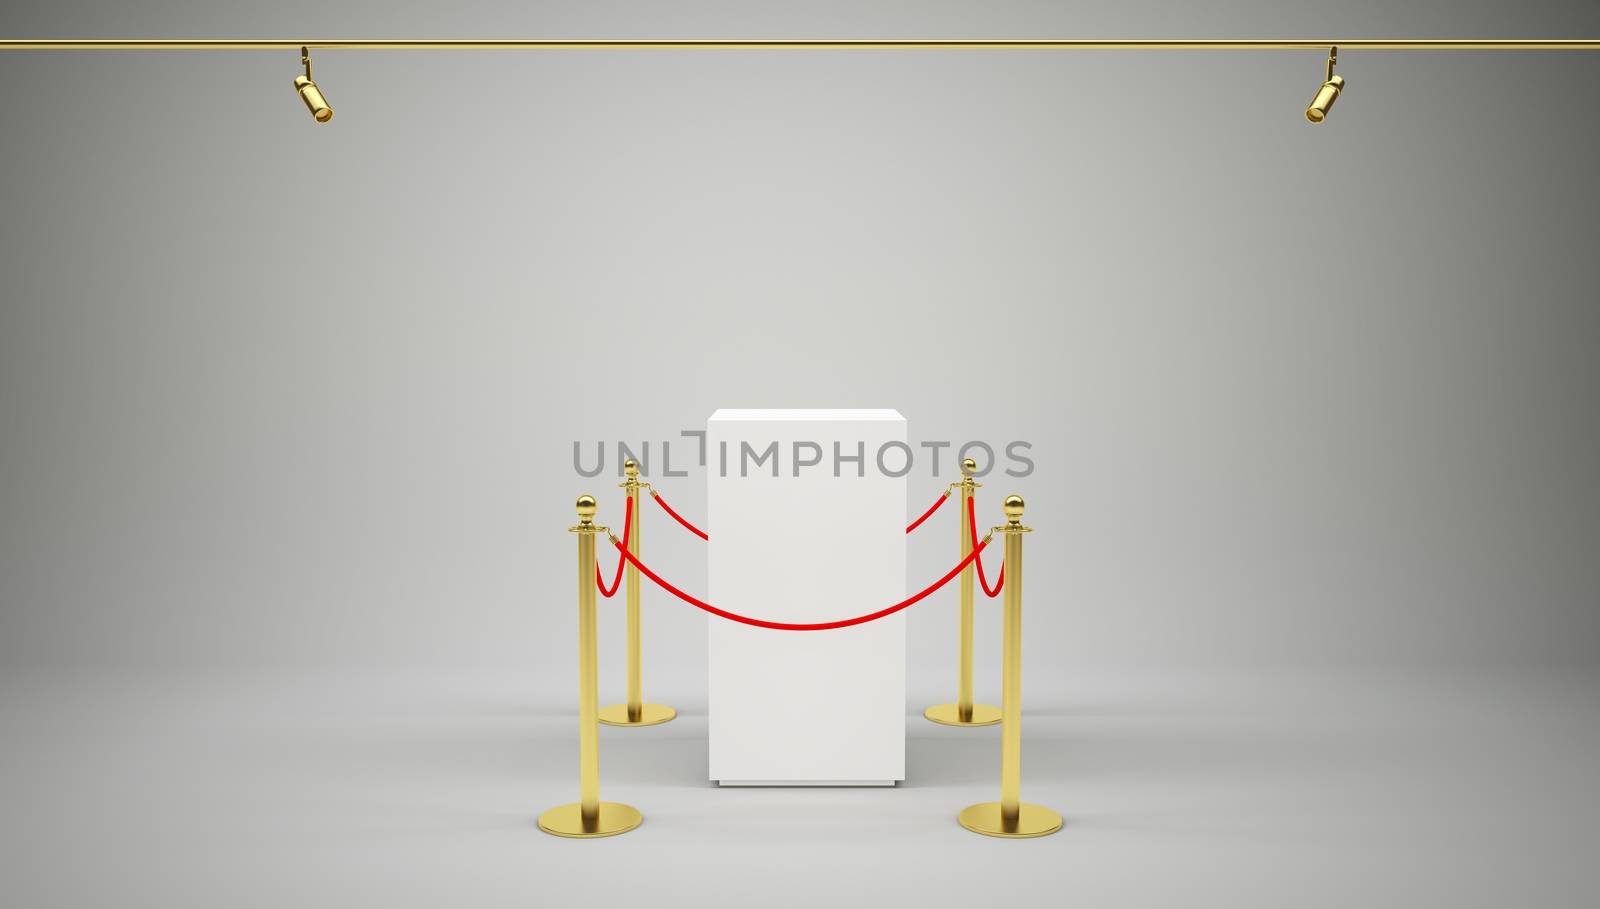 Empty showcase with tiled stand barriers for exhibit. Gray background. 3D illustration